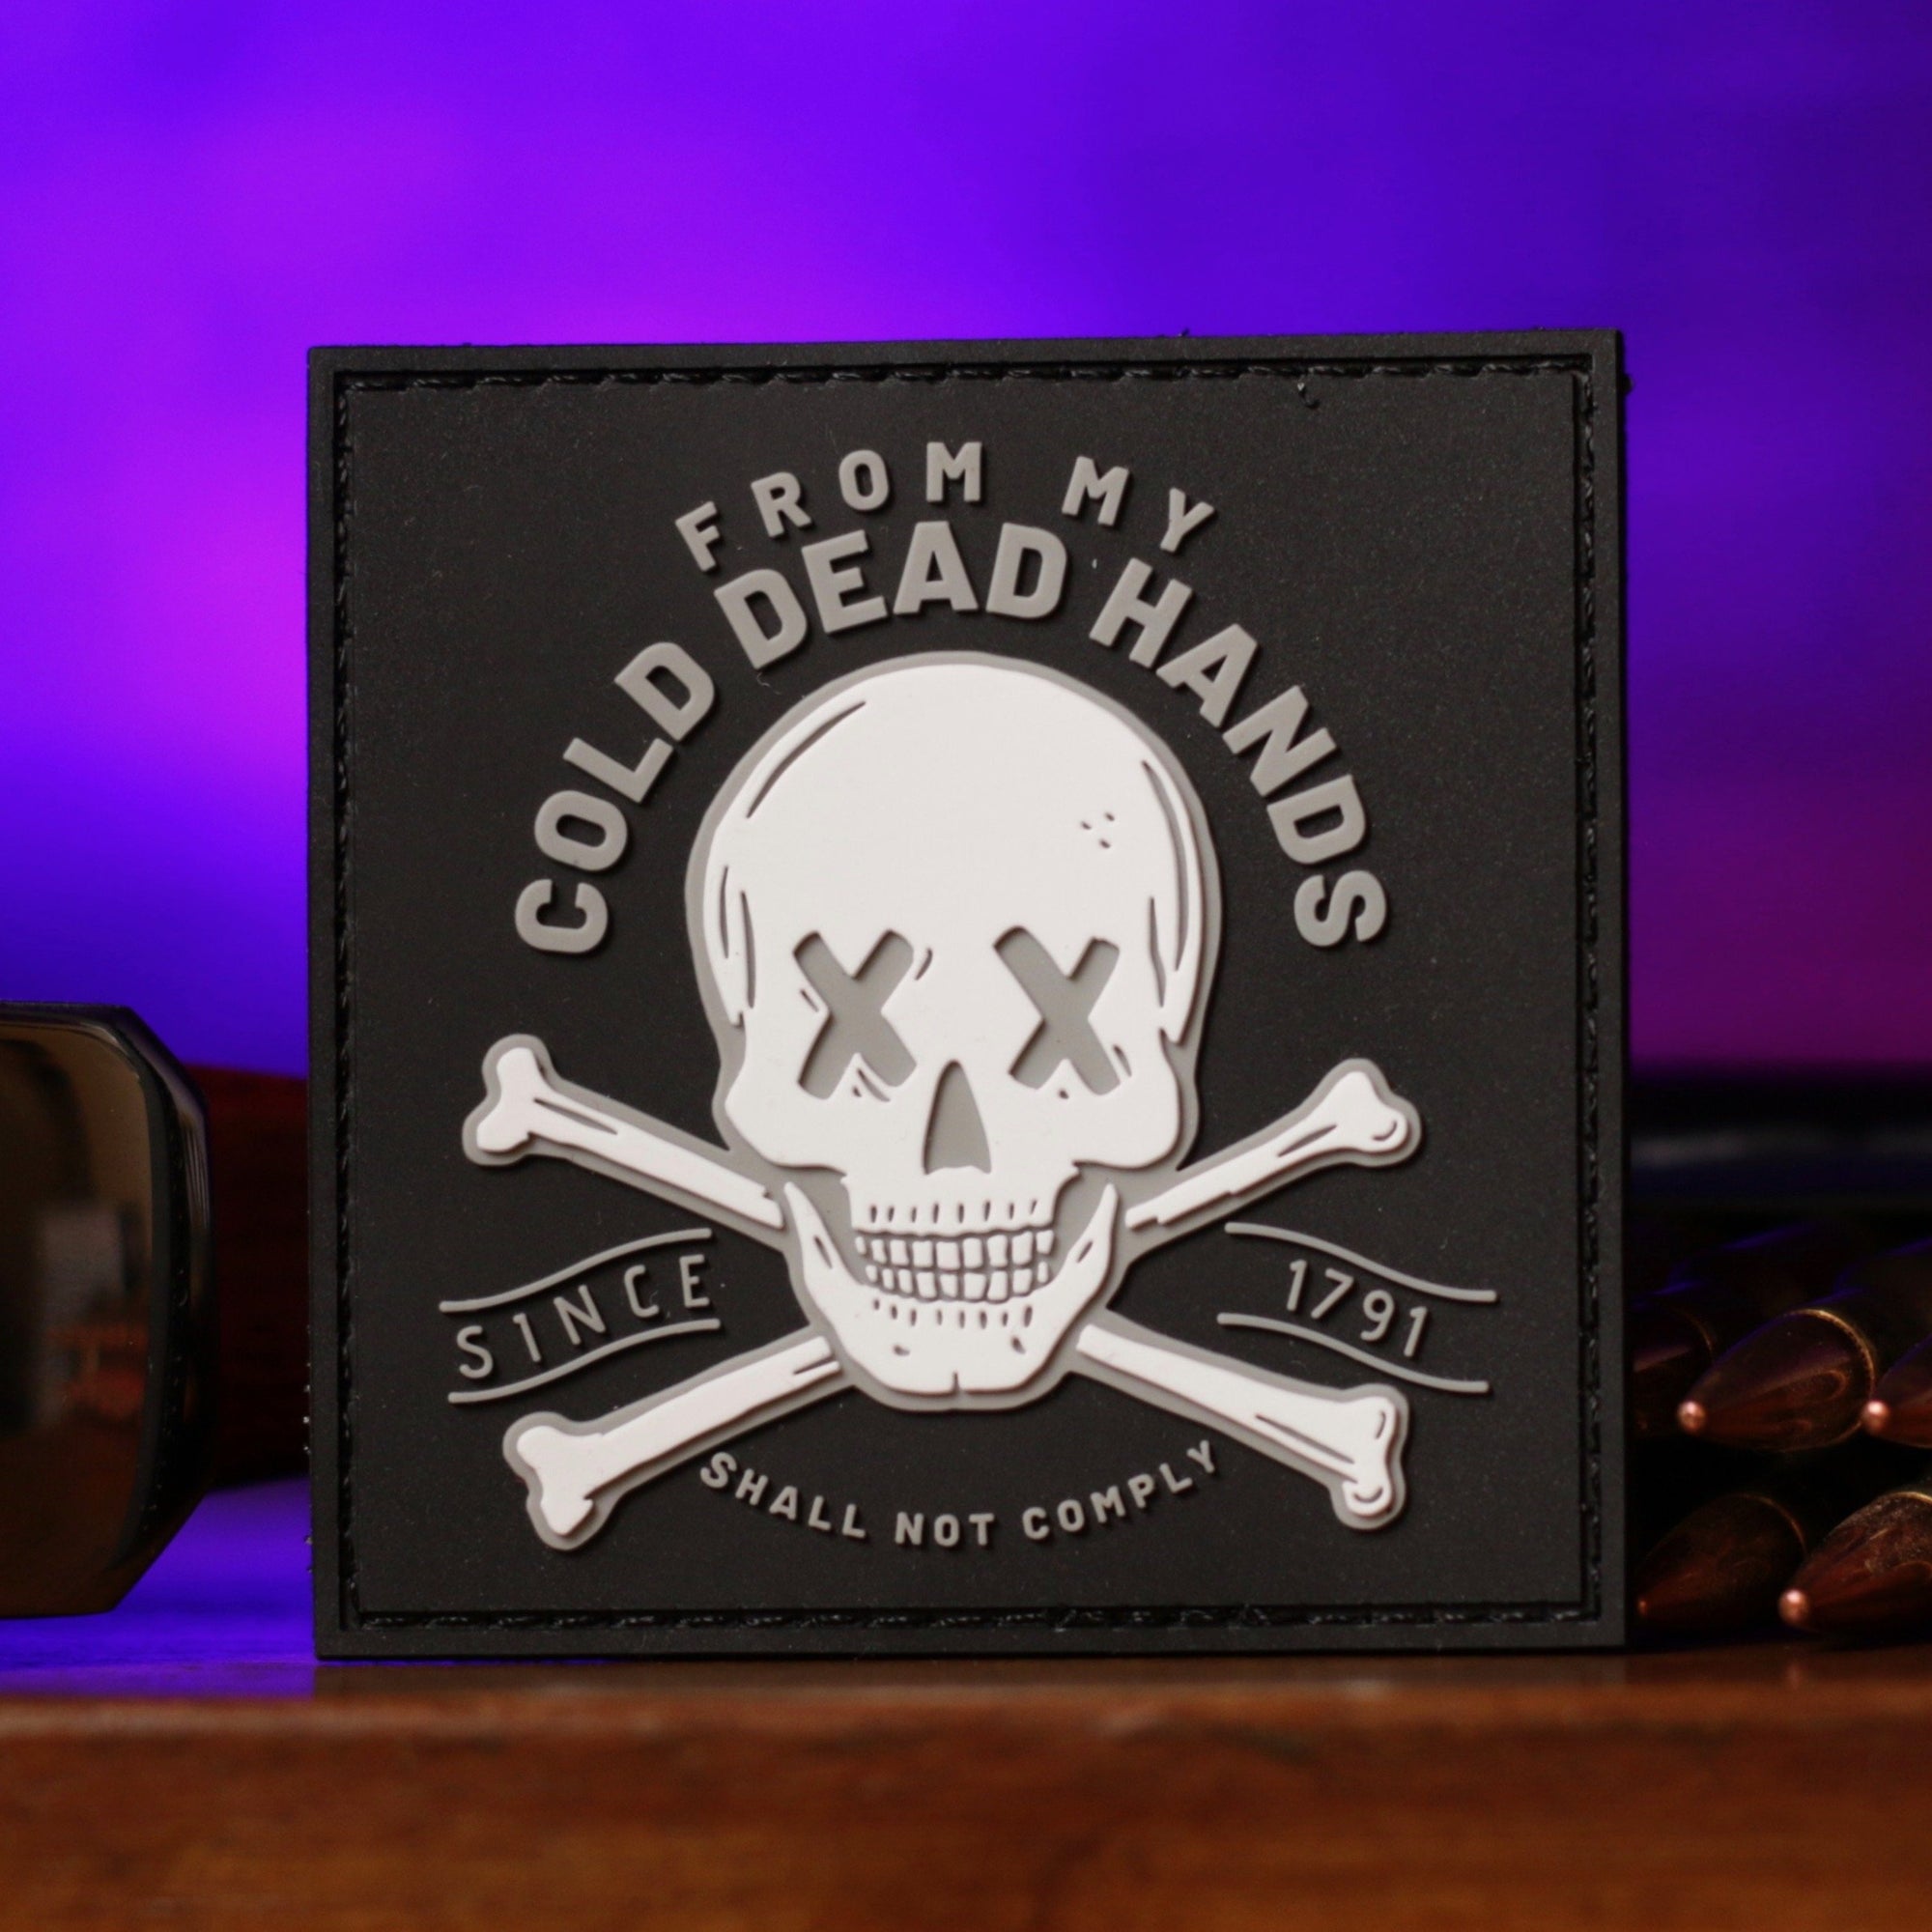 COLD DEAD HANDS Patch